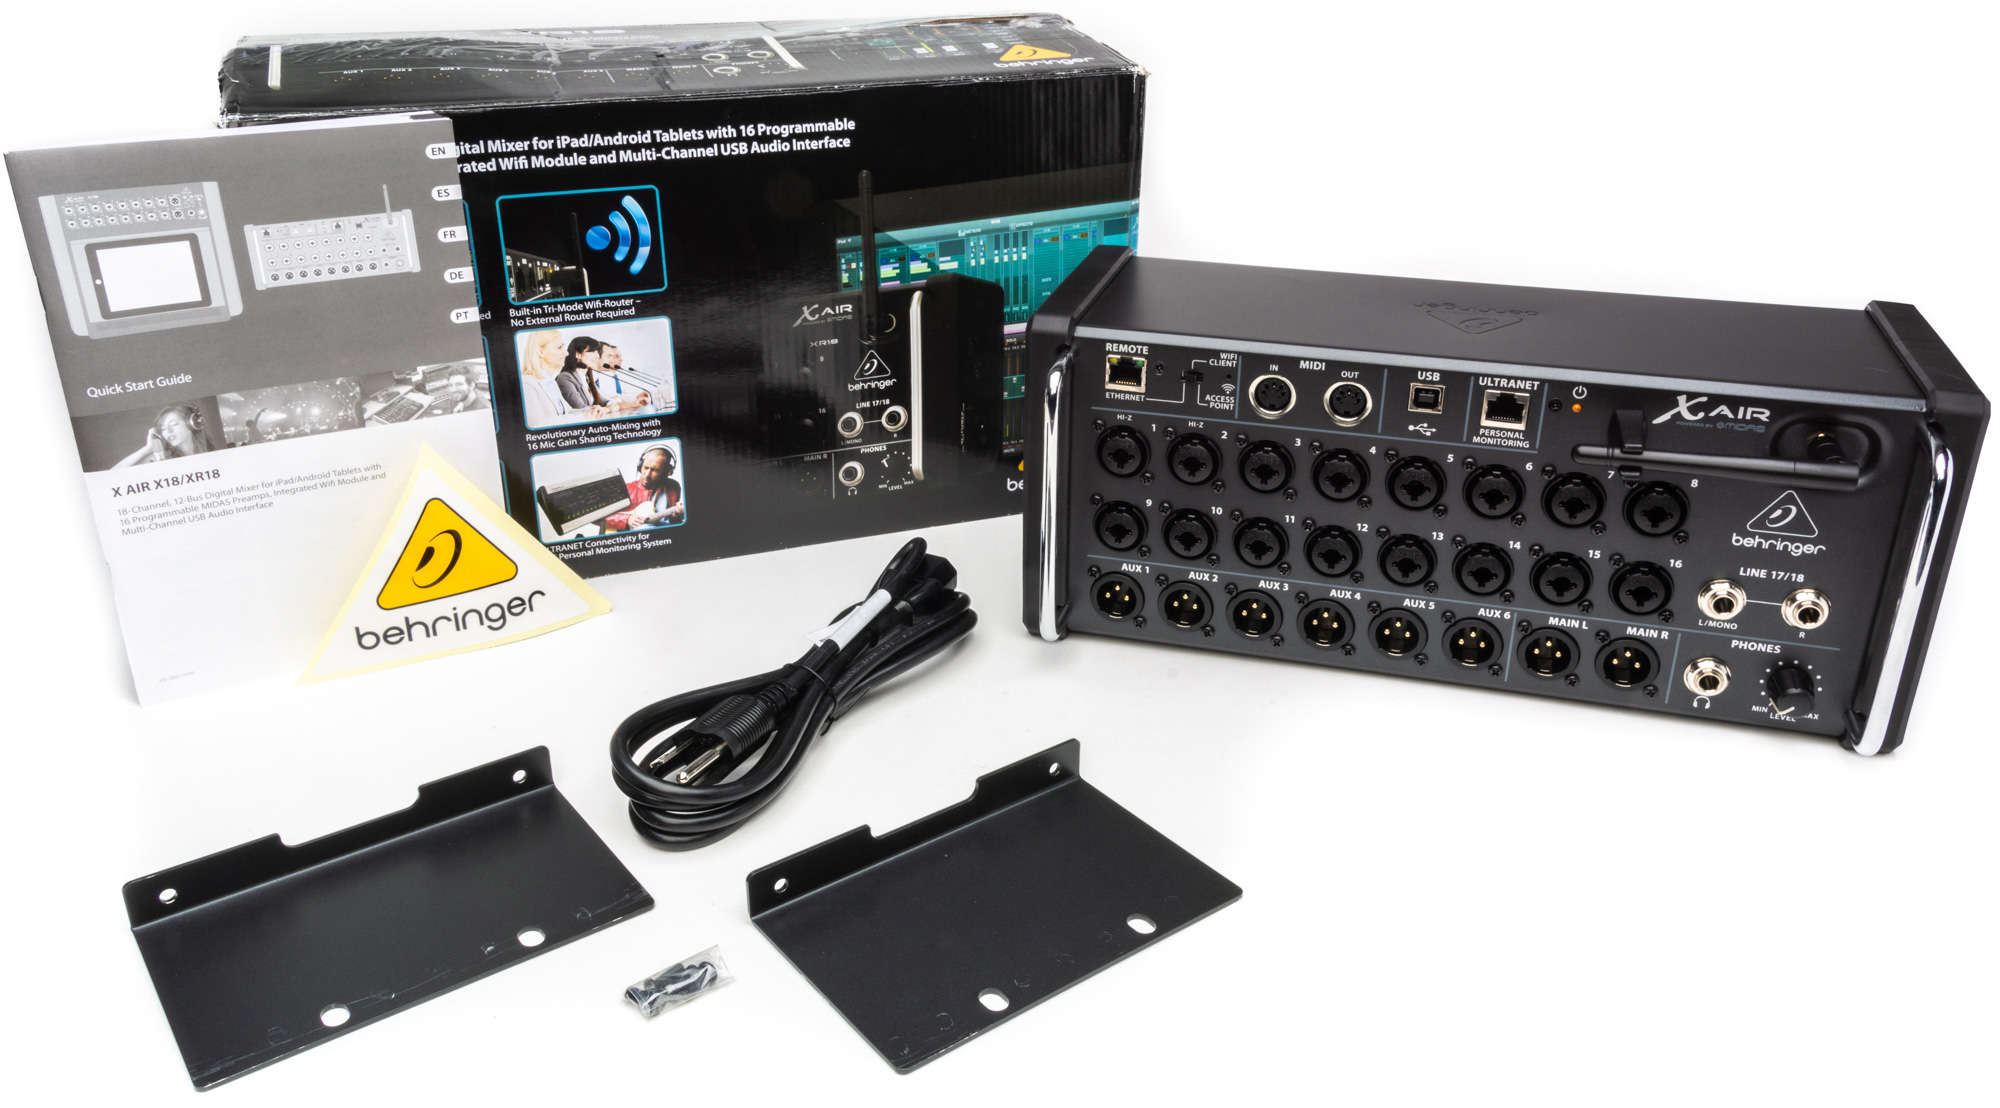 Behringer X Air XR18 18-Channel 12-Bus Rackmount Mixer iPad/Android Tablets - B-Stock (Damaged Packaging)